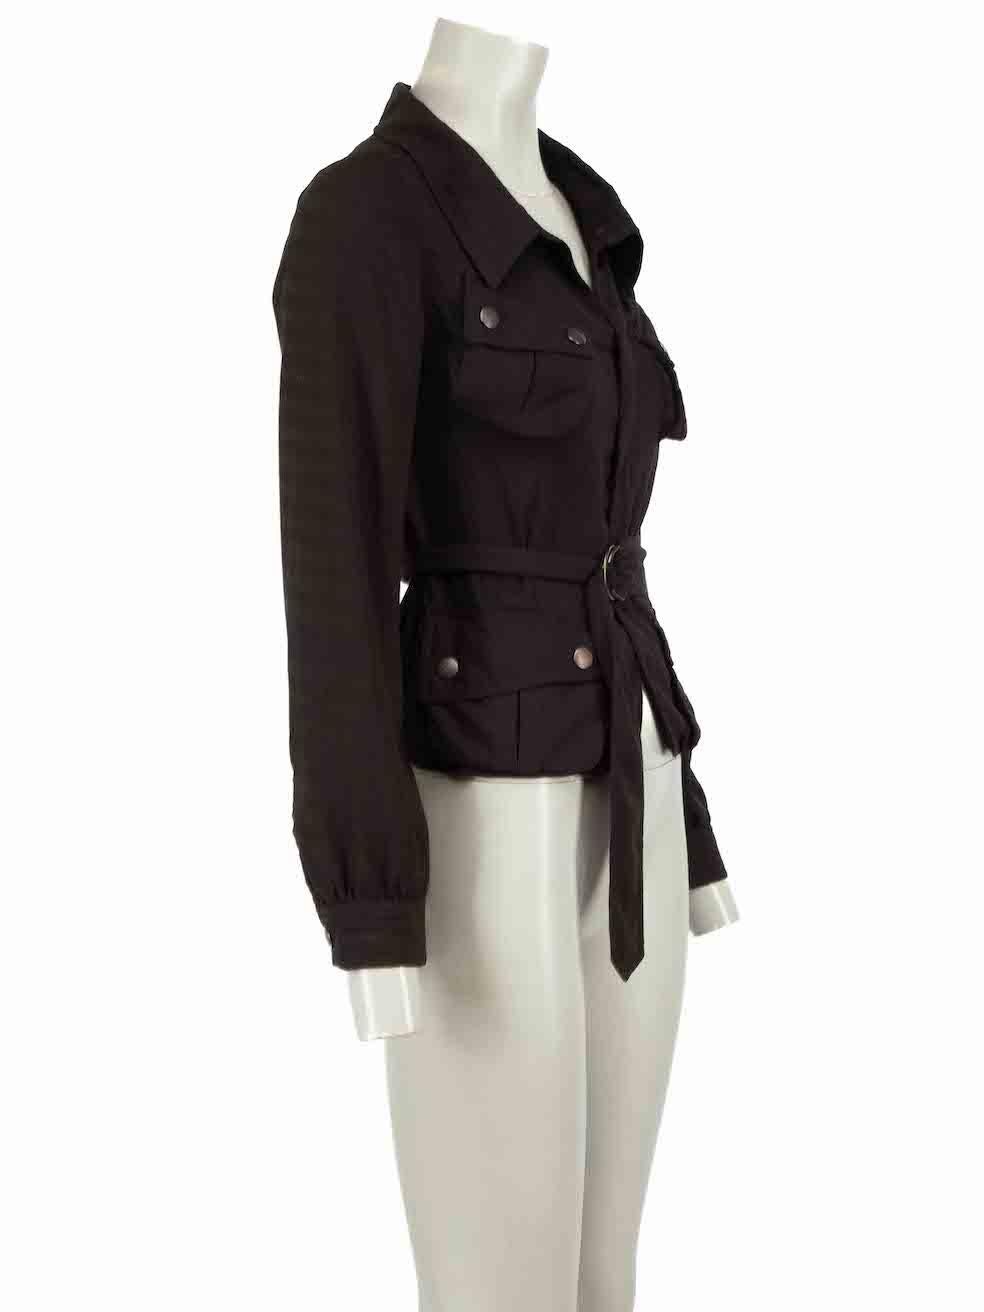 CONDITION is Very good. Minimal wear to blazer is evident. Minimal wear pilling to polyester on this used Jean Peal Gaultier designer resale item.
 
 Details
 Black
 Synthetic
 Utility jacket
 Short length
 Belted
 Front zip closure
 4x Front